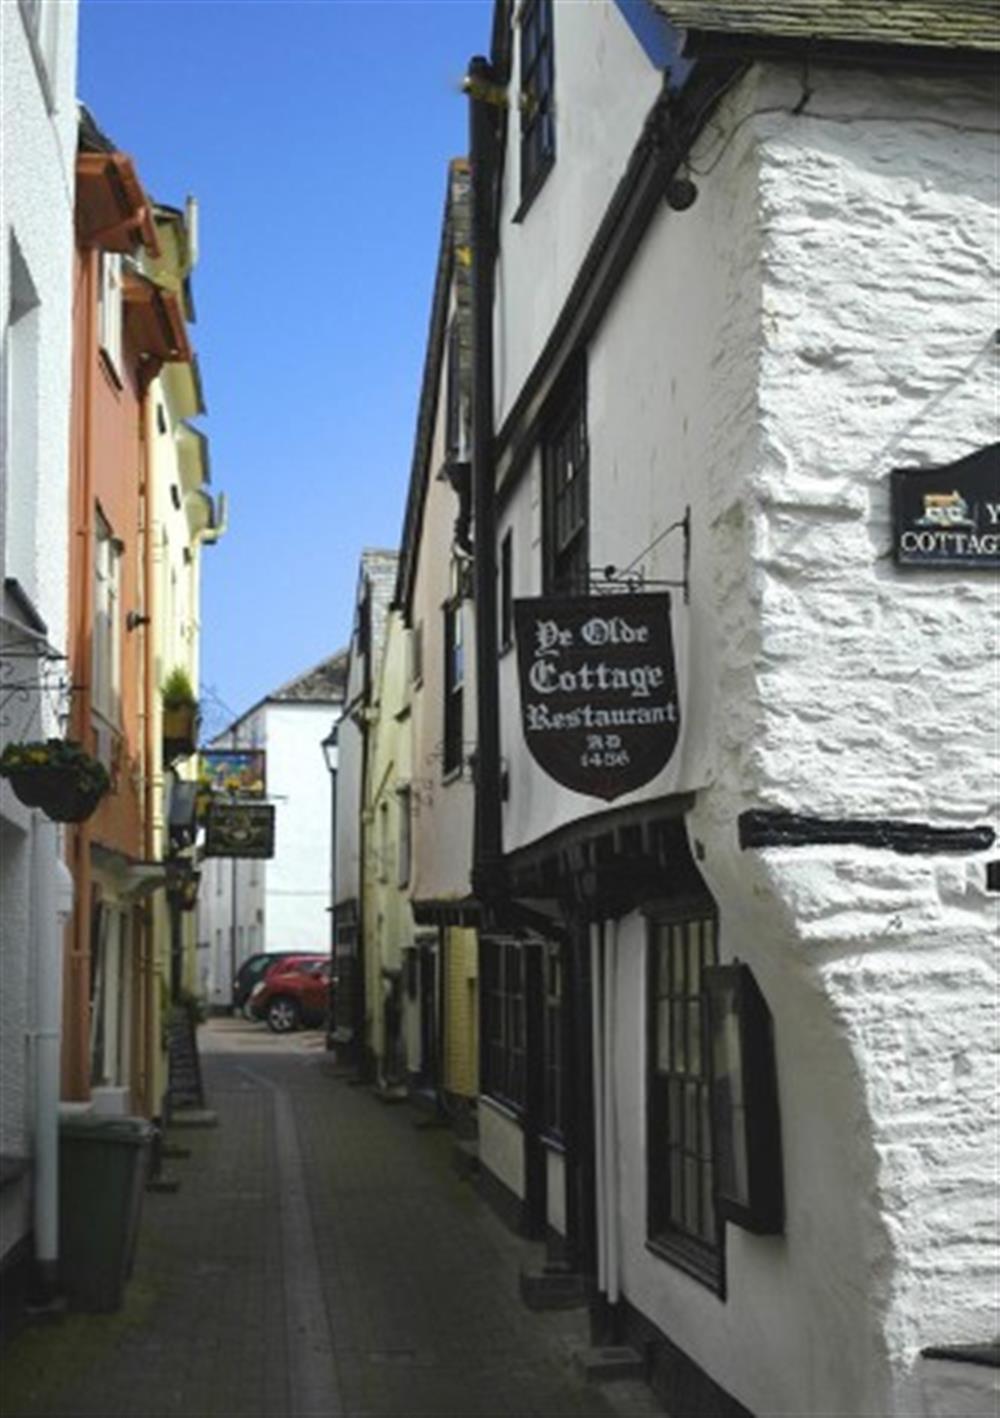 The narrow quaint streets in parts of the Old Town of East Looe.